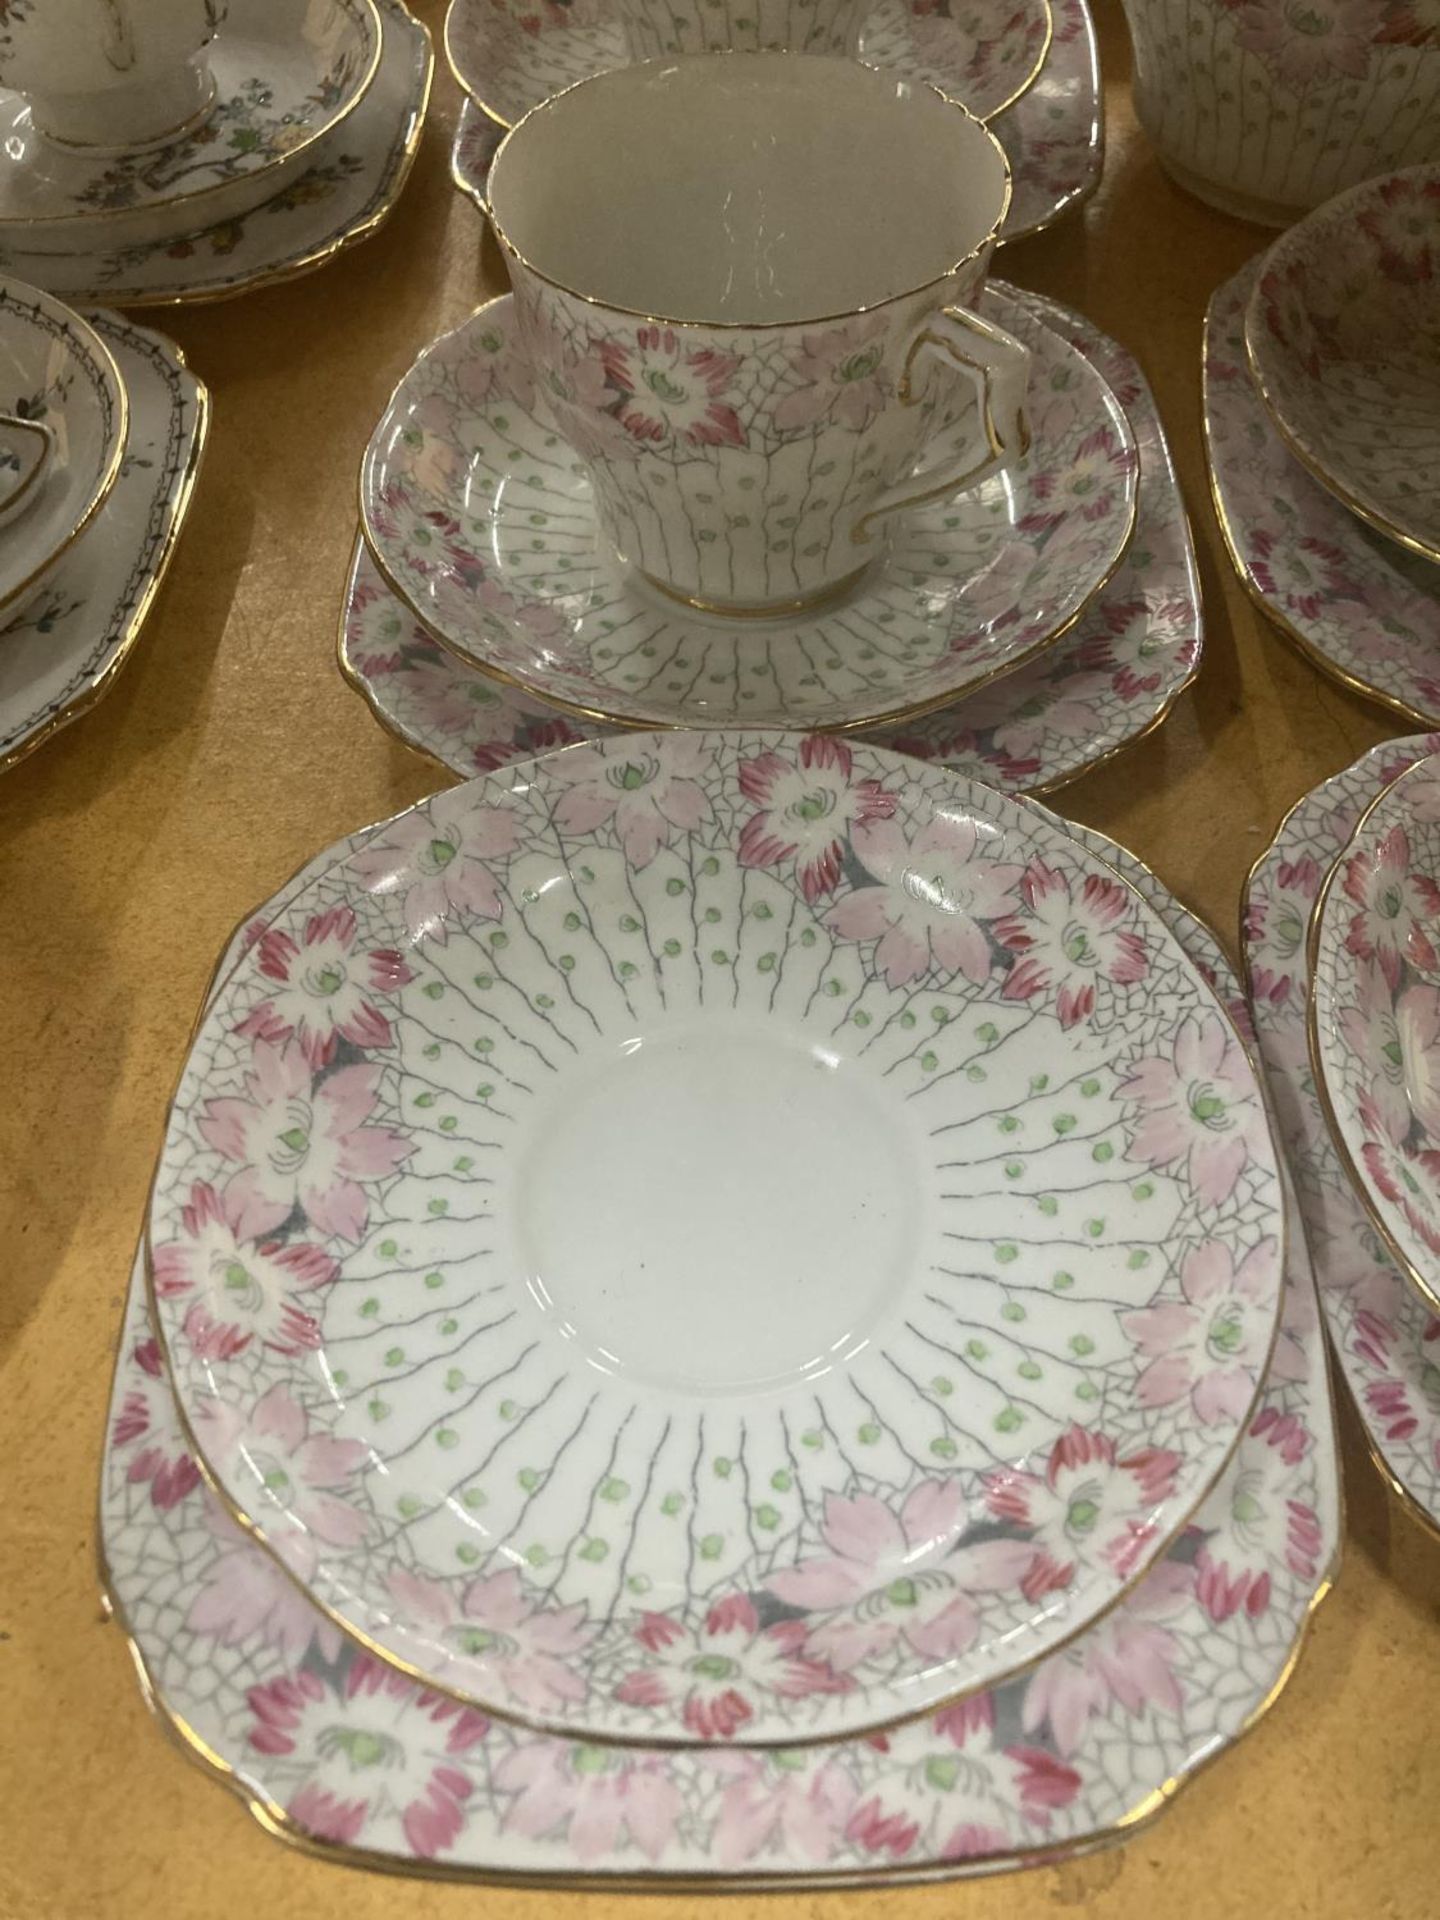 A DELPHINE CHINA TEA AND COFFEE SET IN A PALE PINK FLORAL PATTERN TO INCLUDE A TEA POT, COFFEE - Image 3 of 6